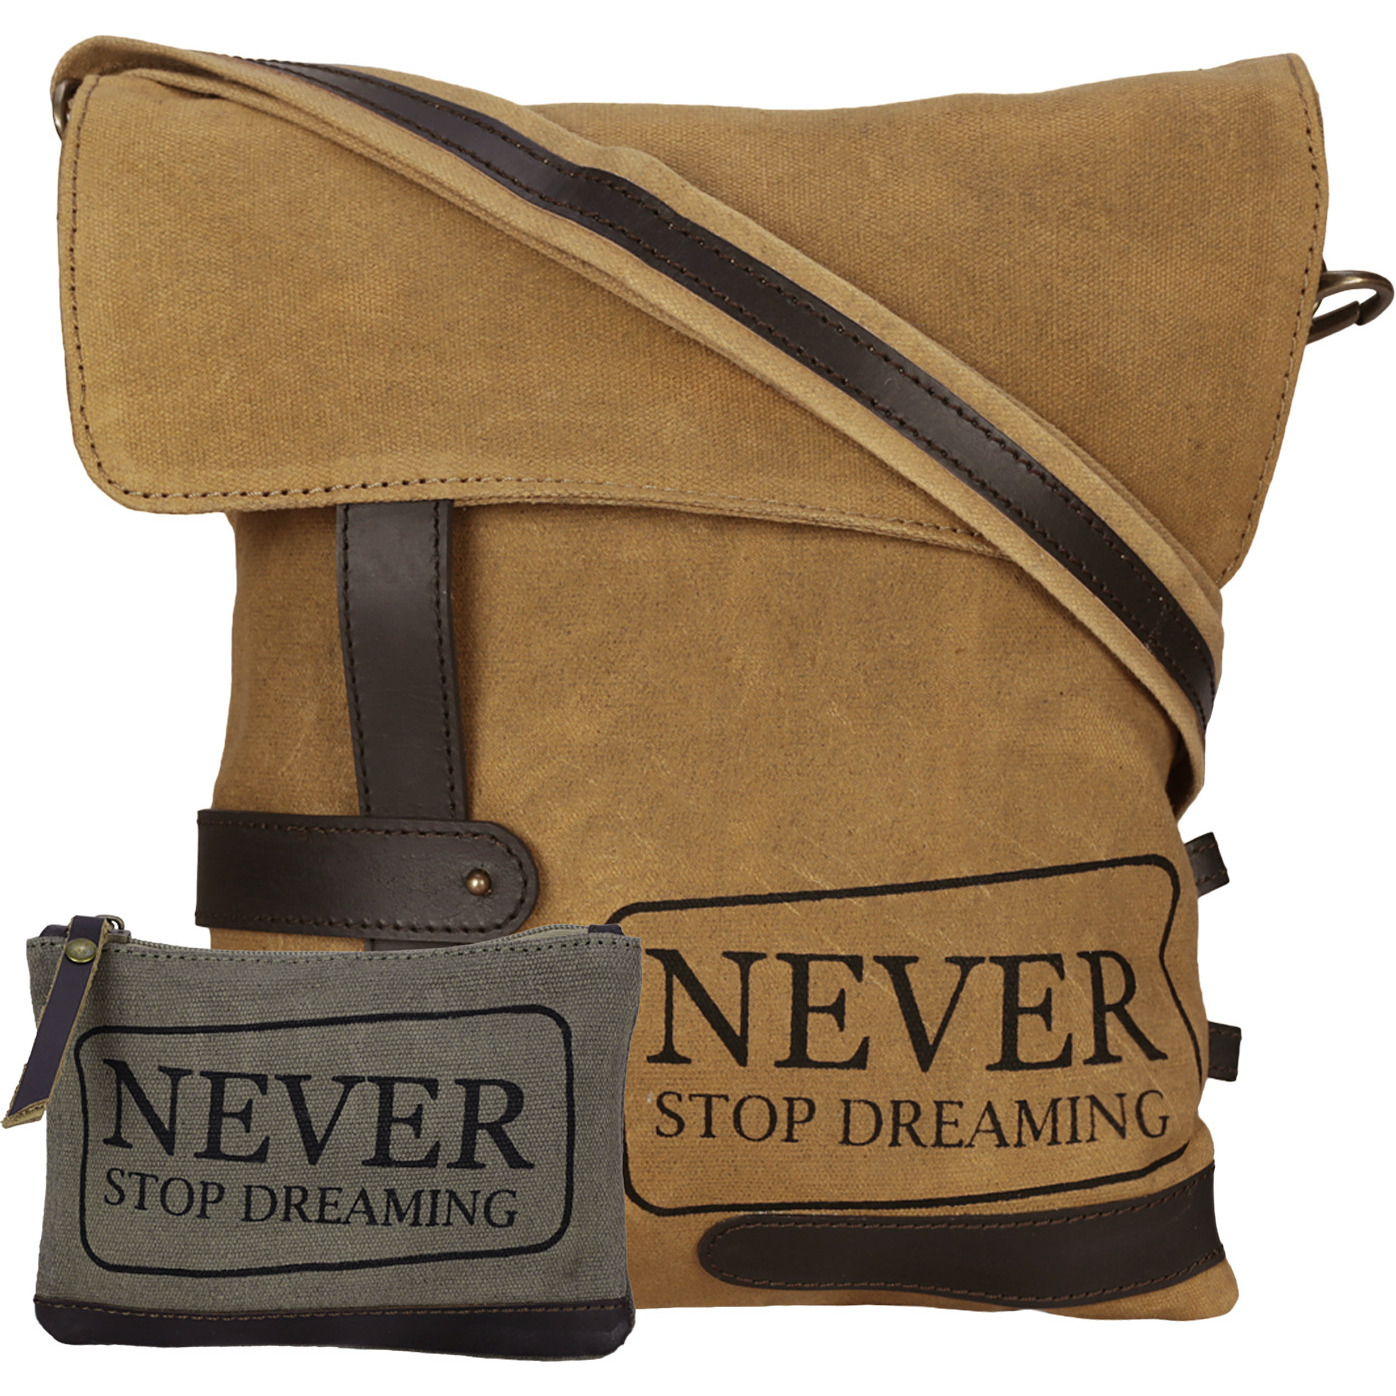 NEUDIS Genuine Leather & Recycled Stone Washed Canvas Travel Sling / Cross Body Bag for iPad & Tablet - Never Stop Dreaming - Brown